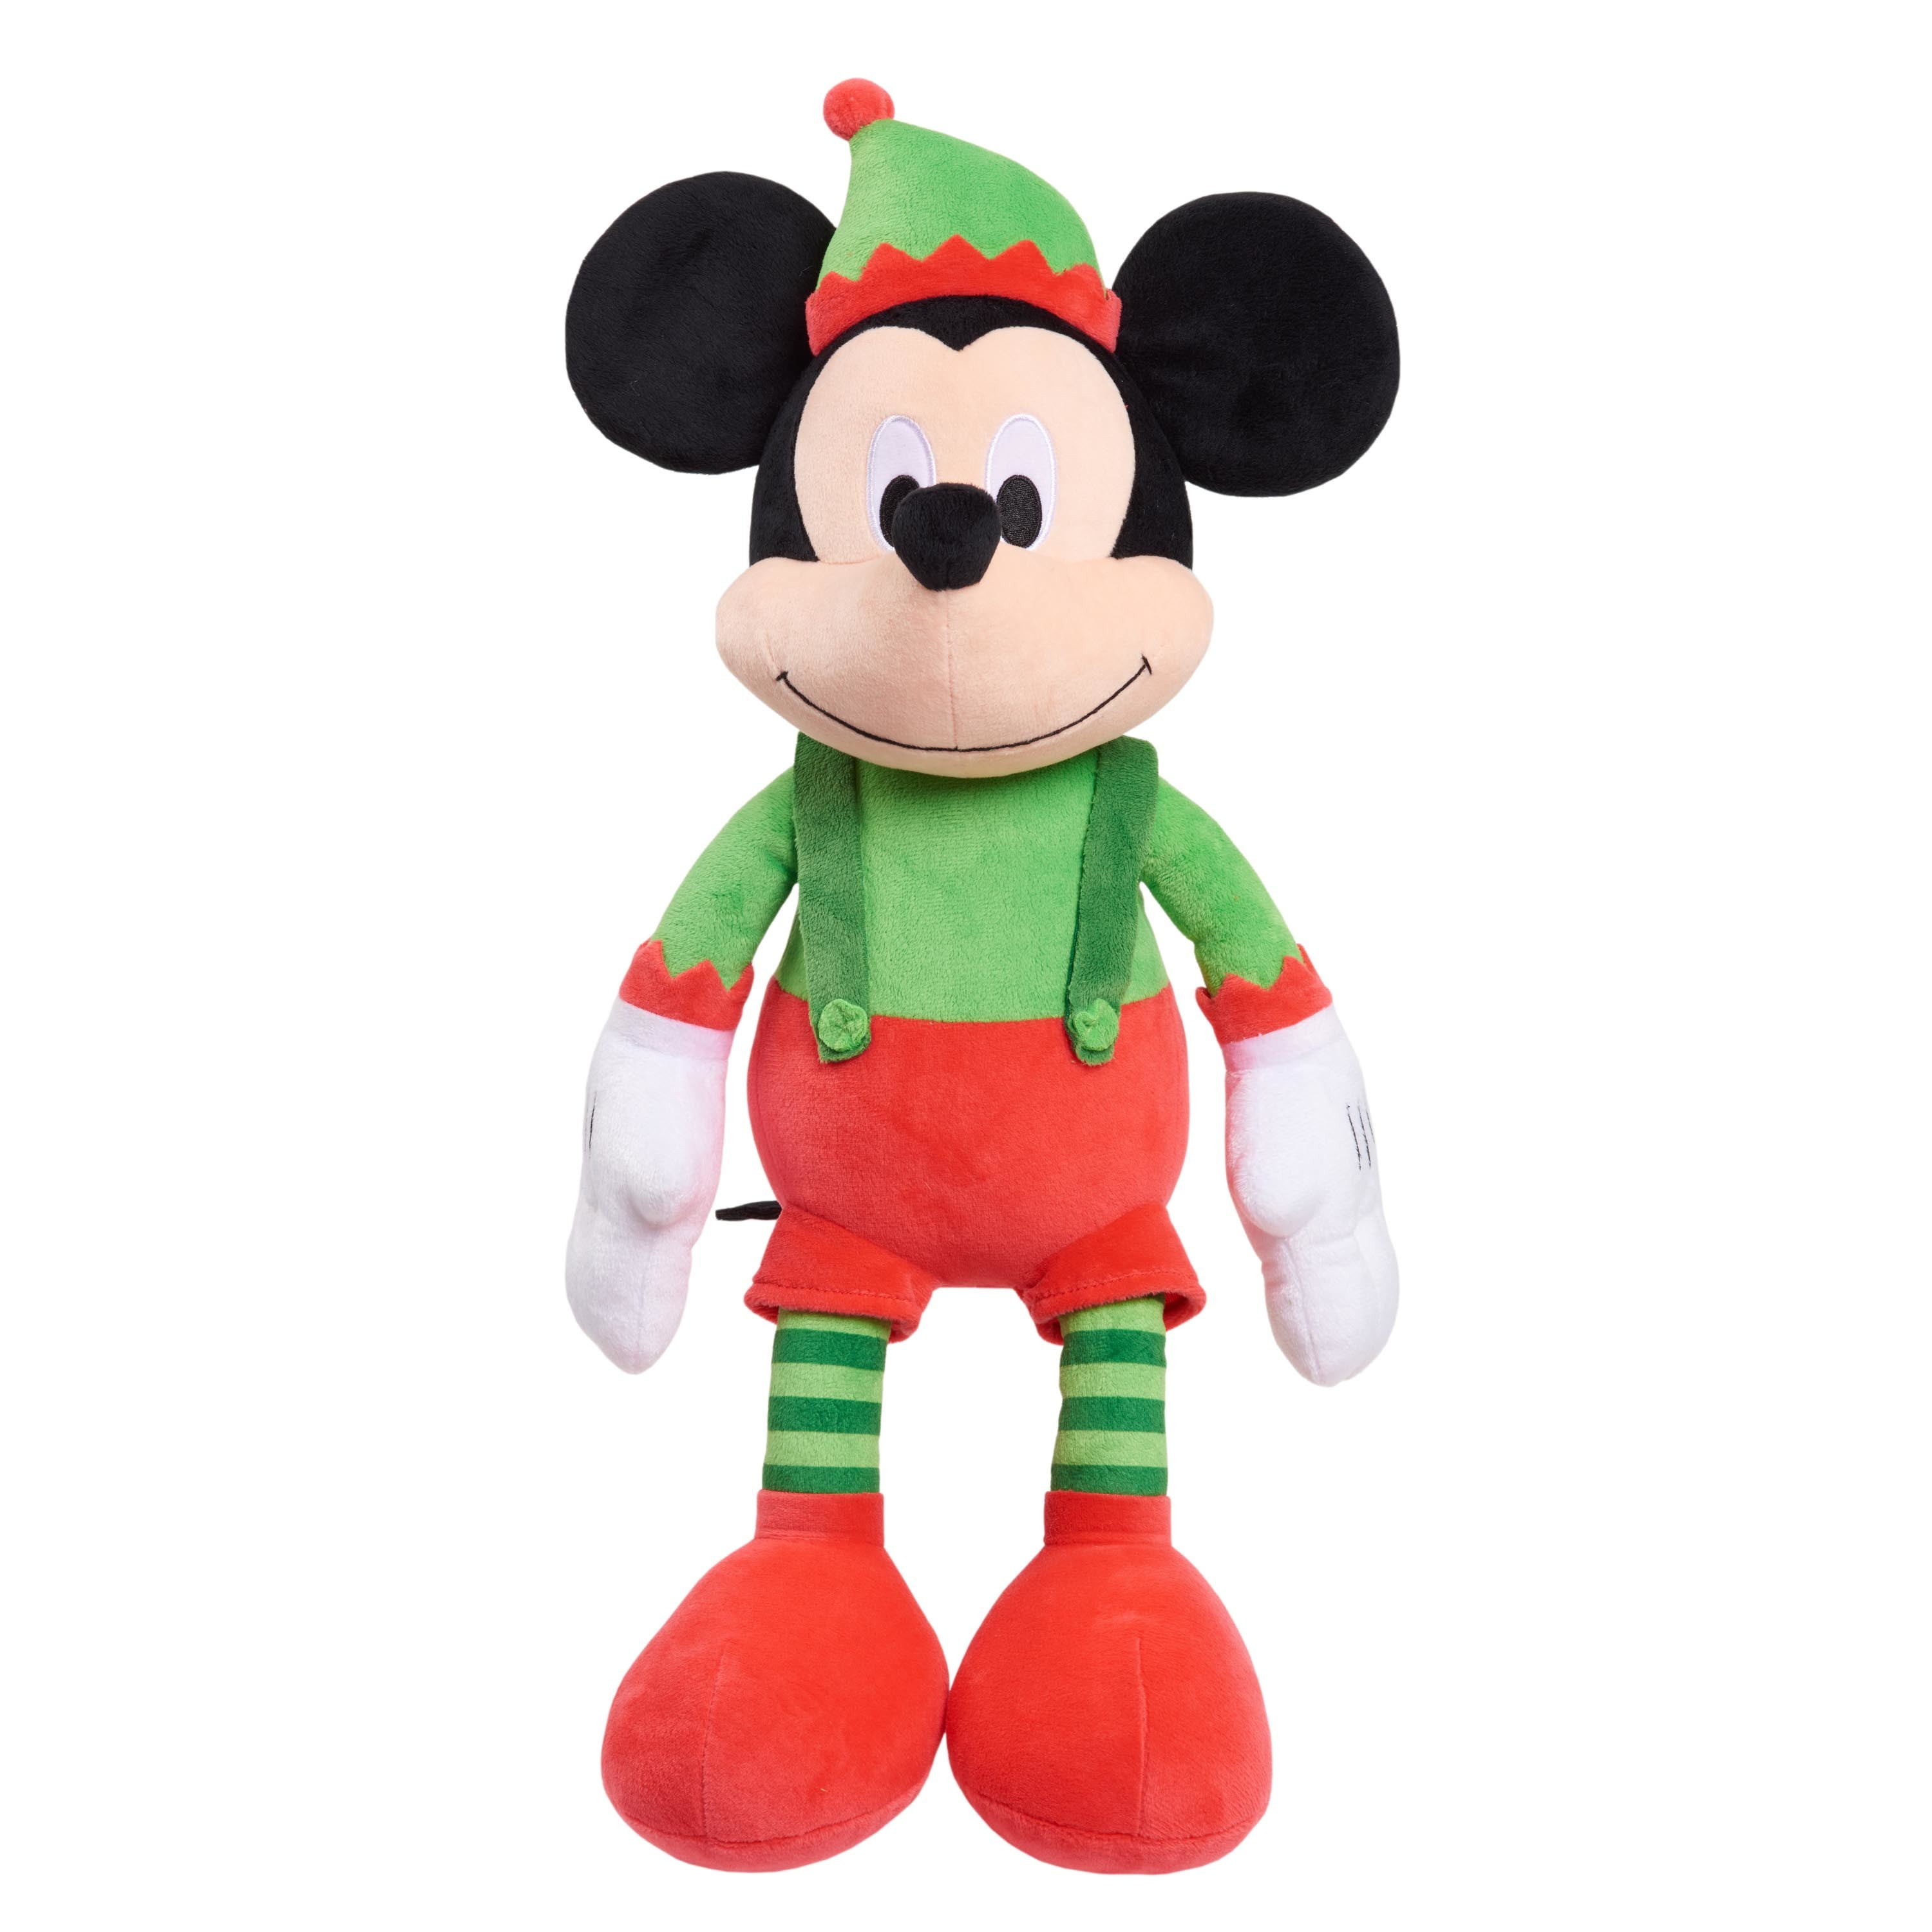 Disney Mickey Mouse Classic 25" Plush Toy Doll Christmas Gift for Kids 